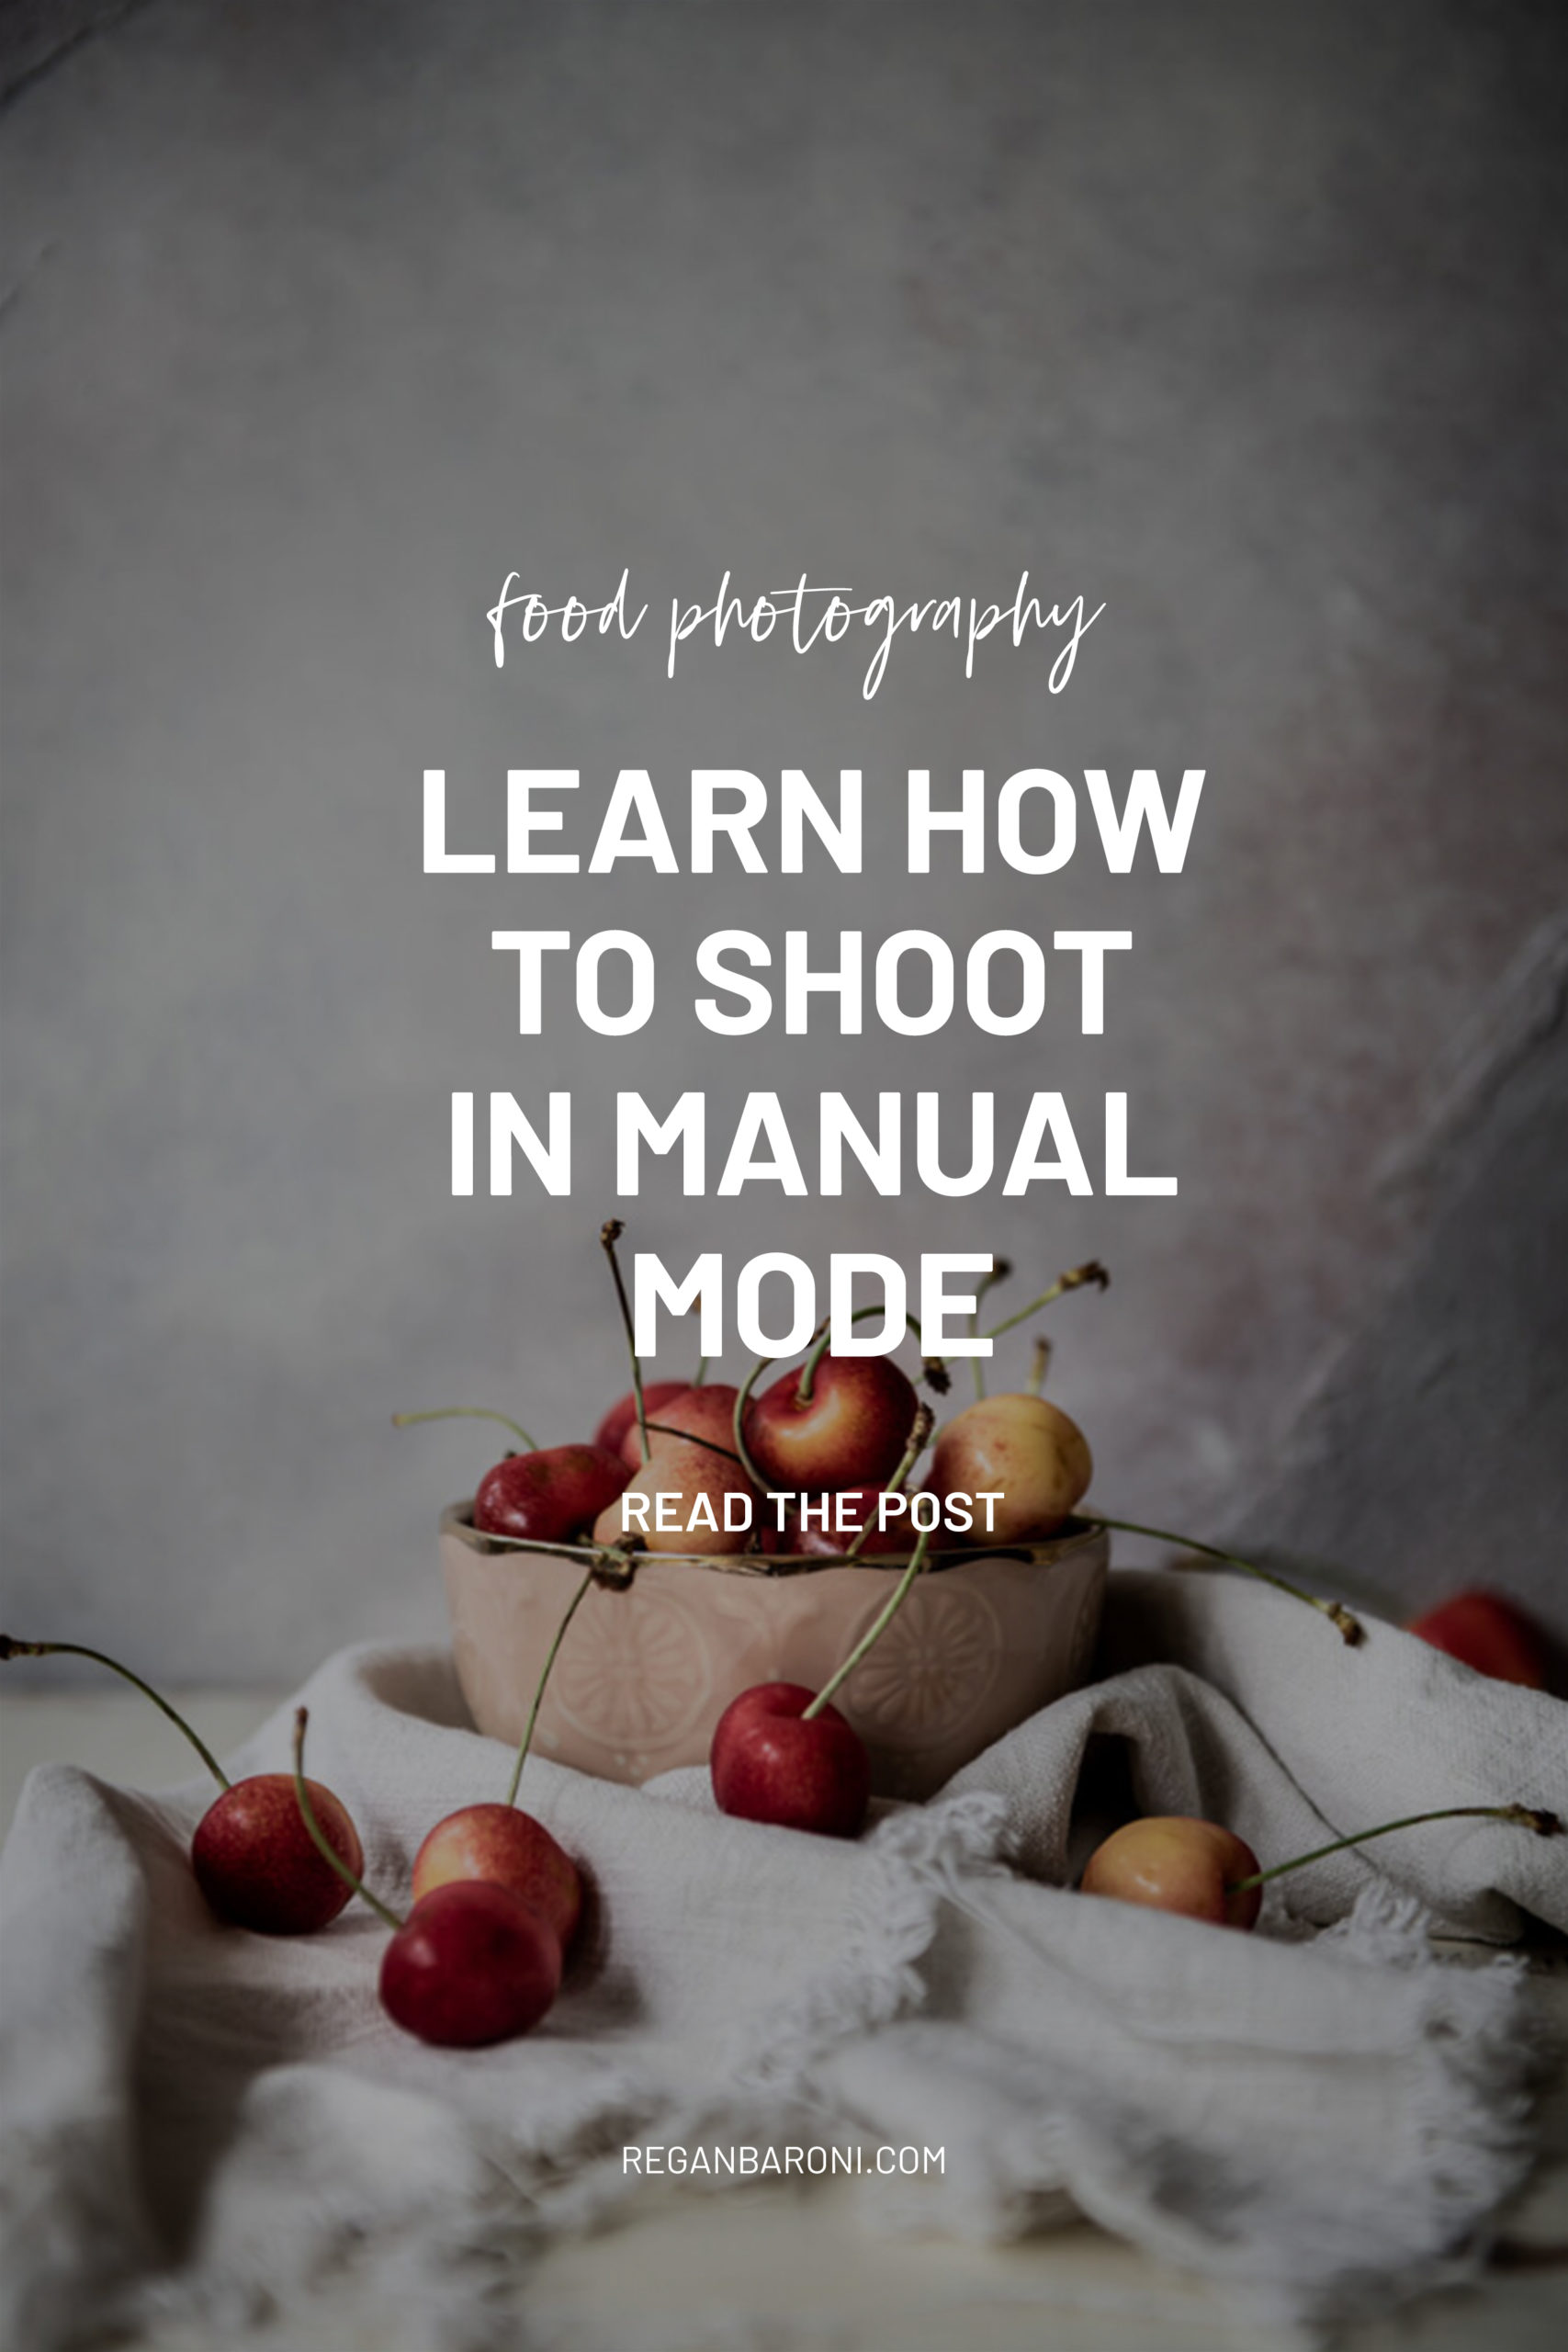 How To Shoot in Manual Mode